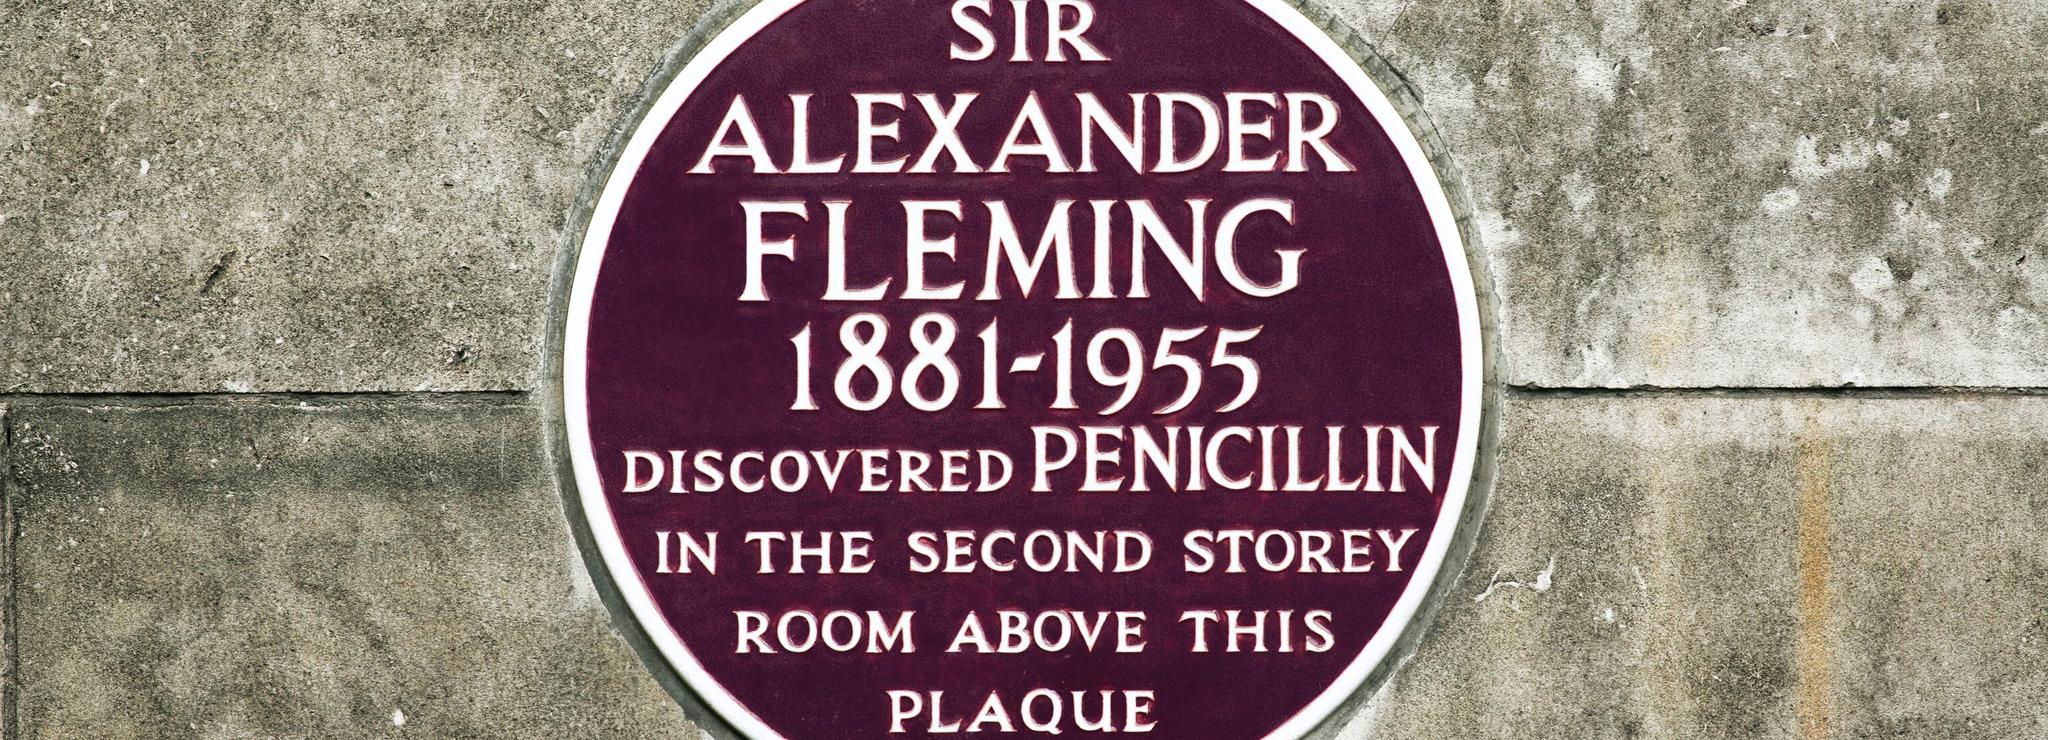 Maroon plaque on St Mary's Hospital London commemorating discovery in 1928 of penicillin by Alexander Fleming